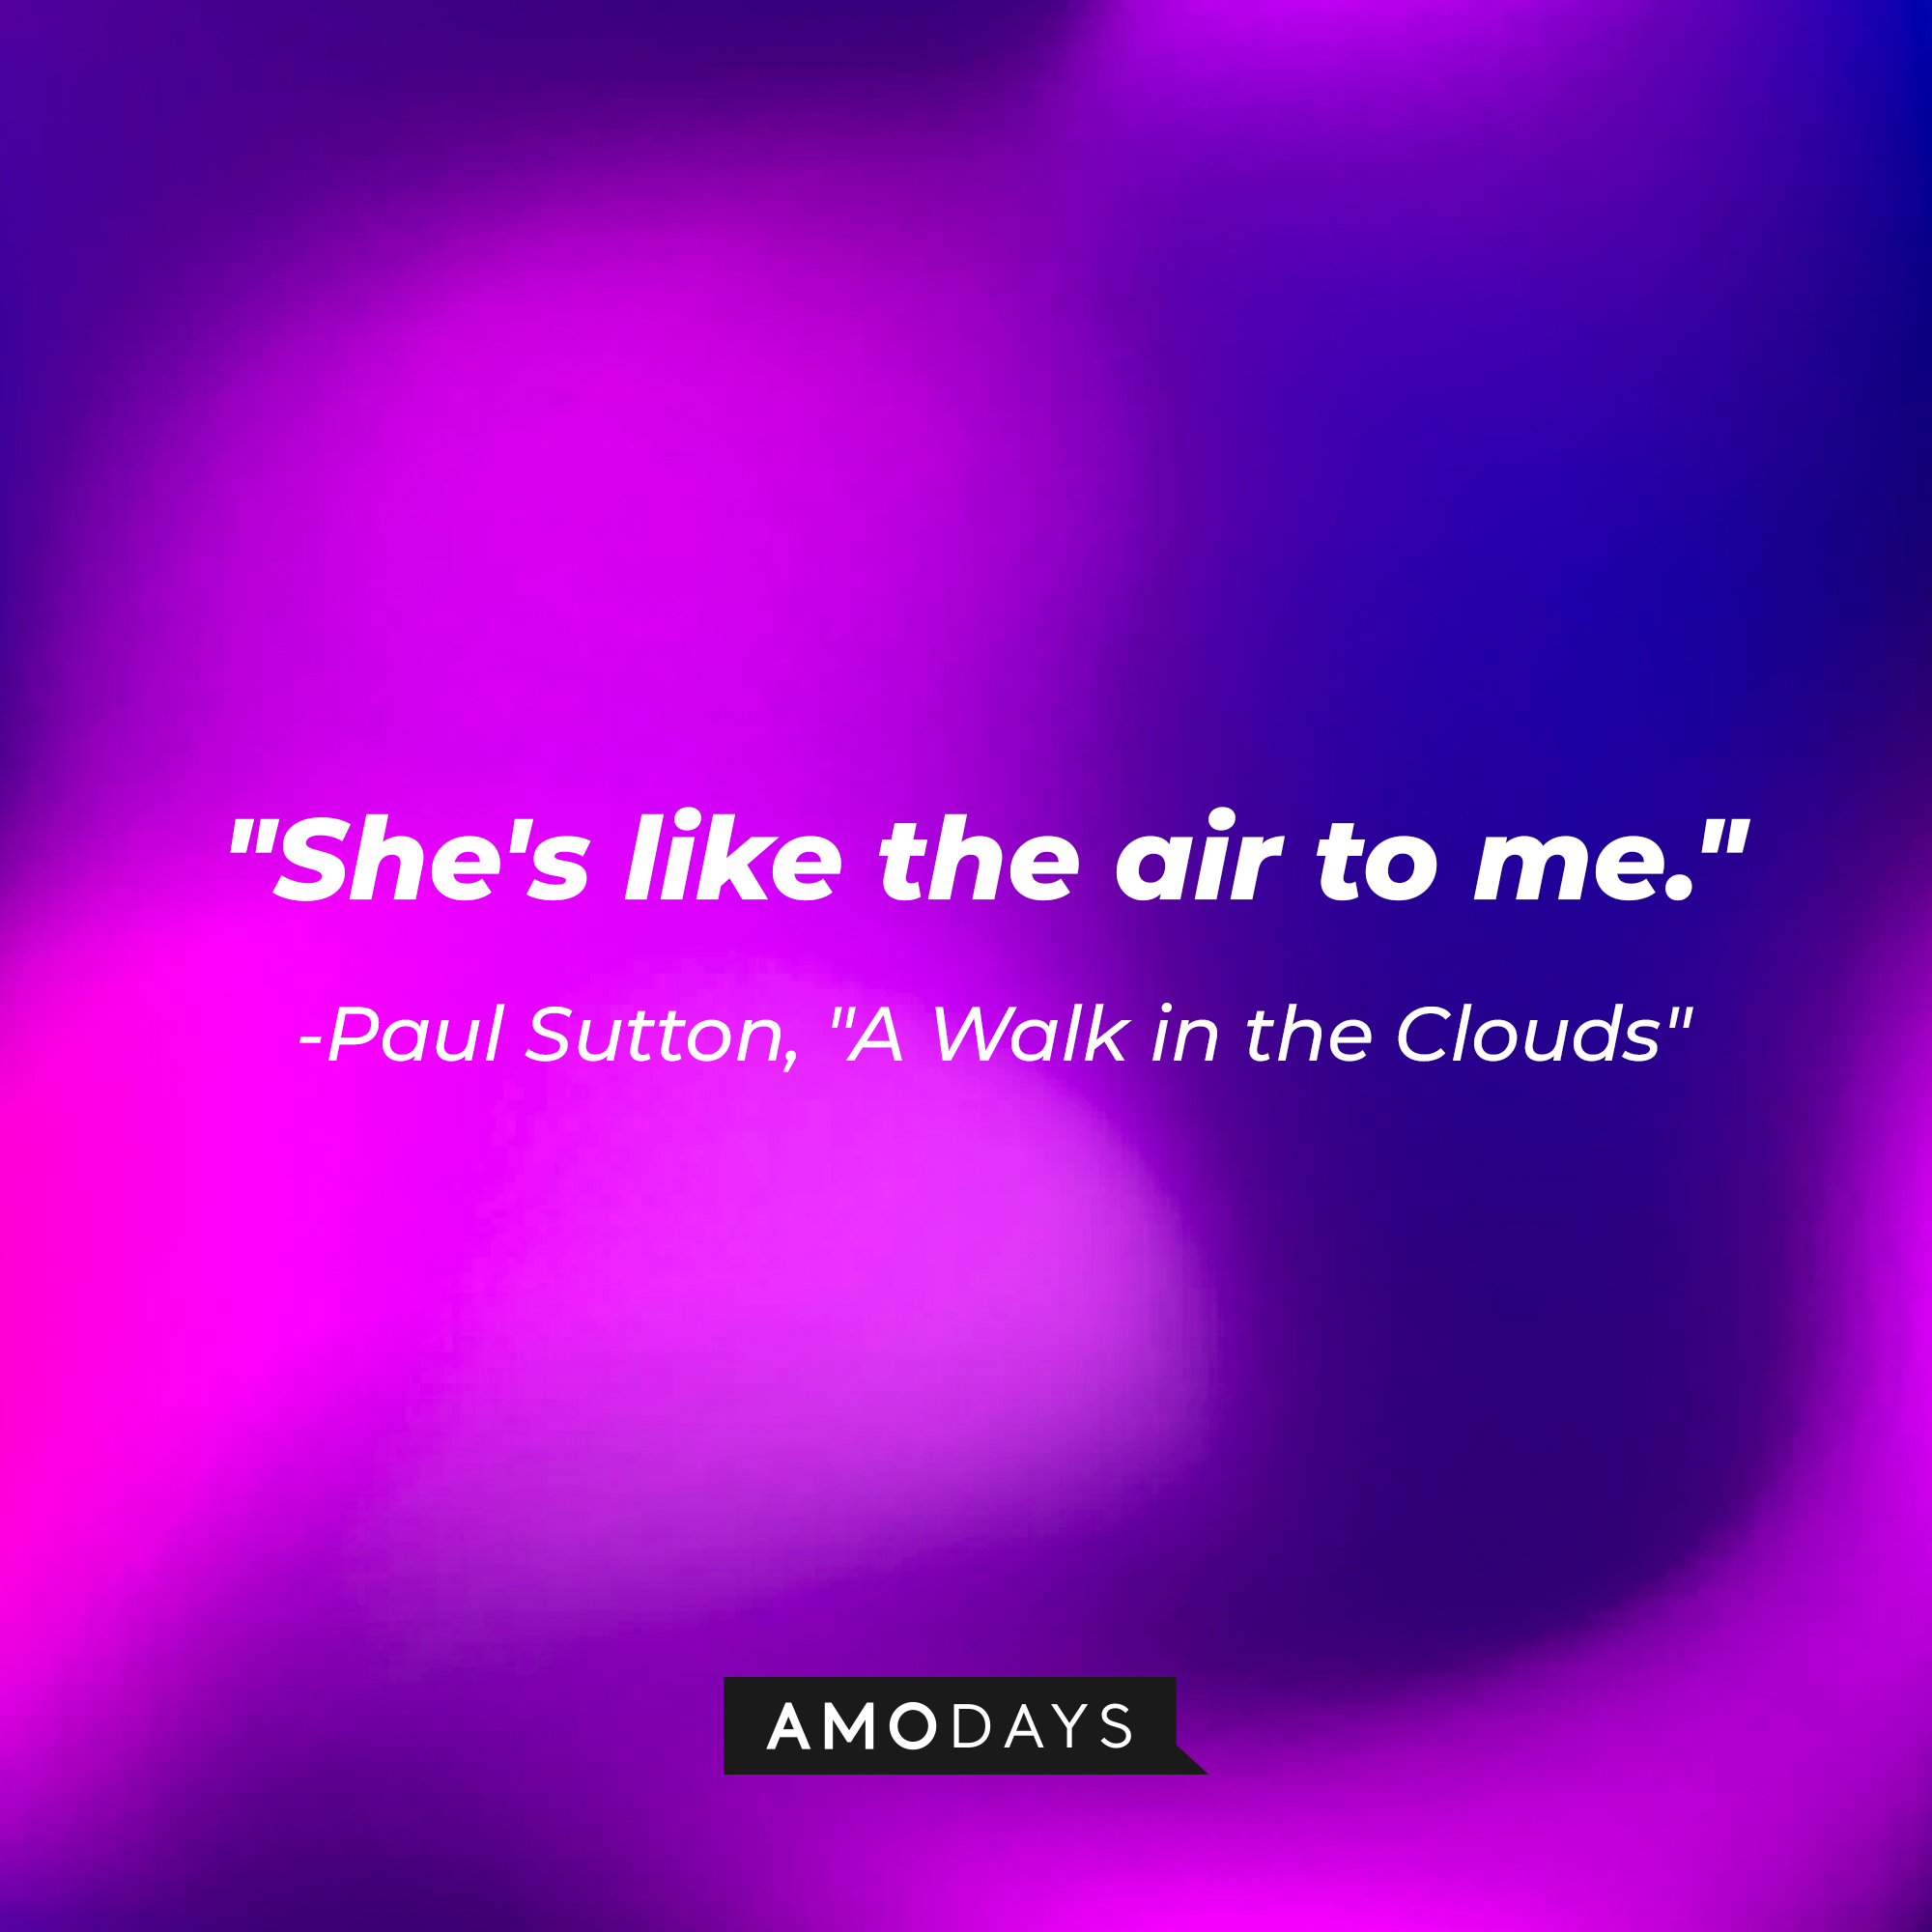 Paul Sutton's quote: "She's like the air to me." | Source: AmoDays